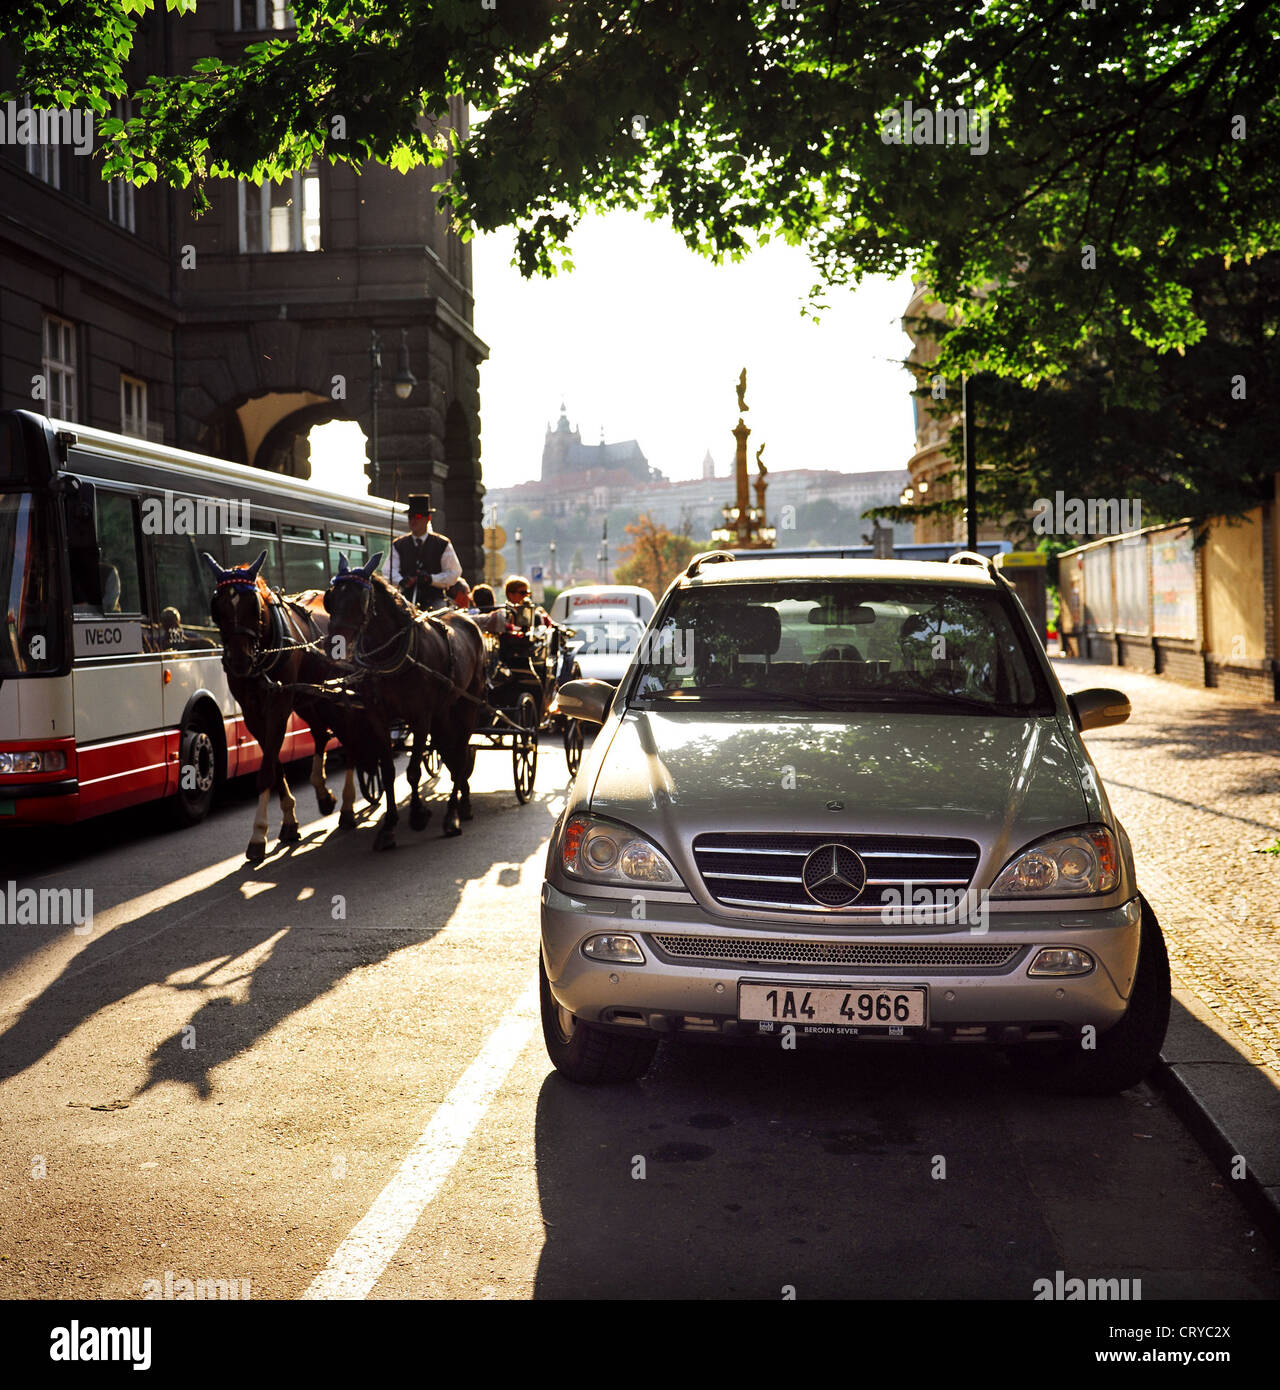 Prague, team of horses and Mercedes terrain vehicle in the Old Town Stock Photo